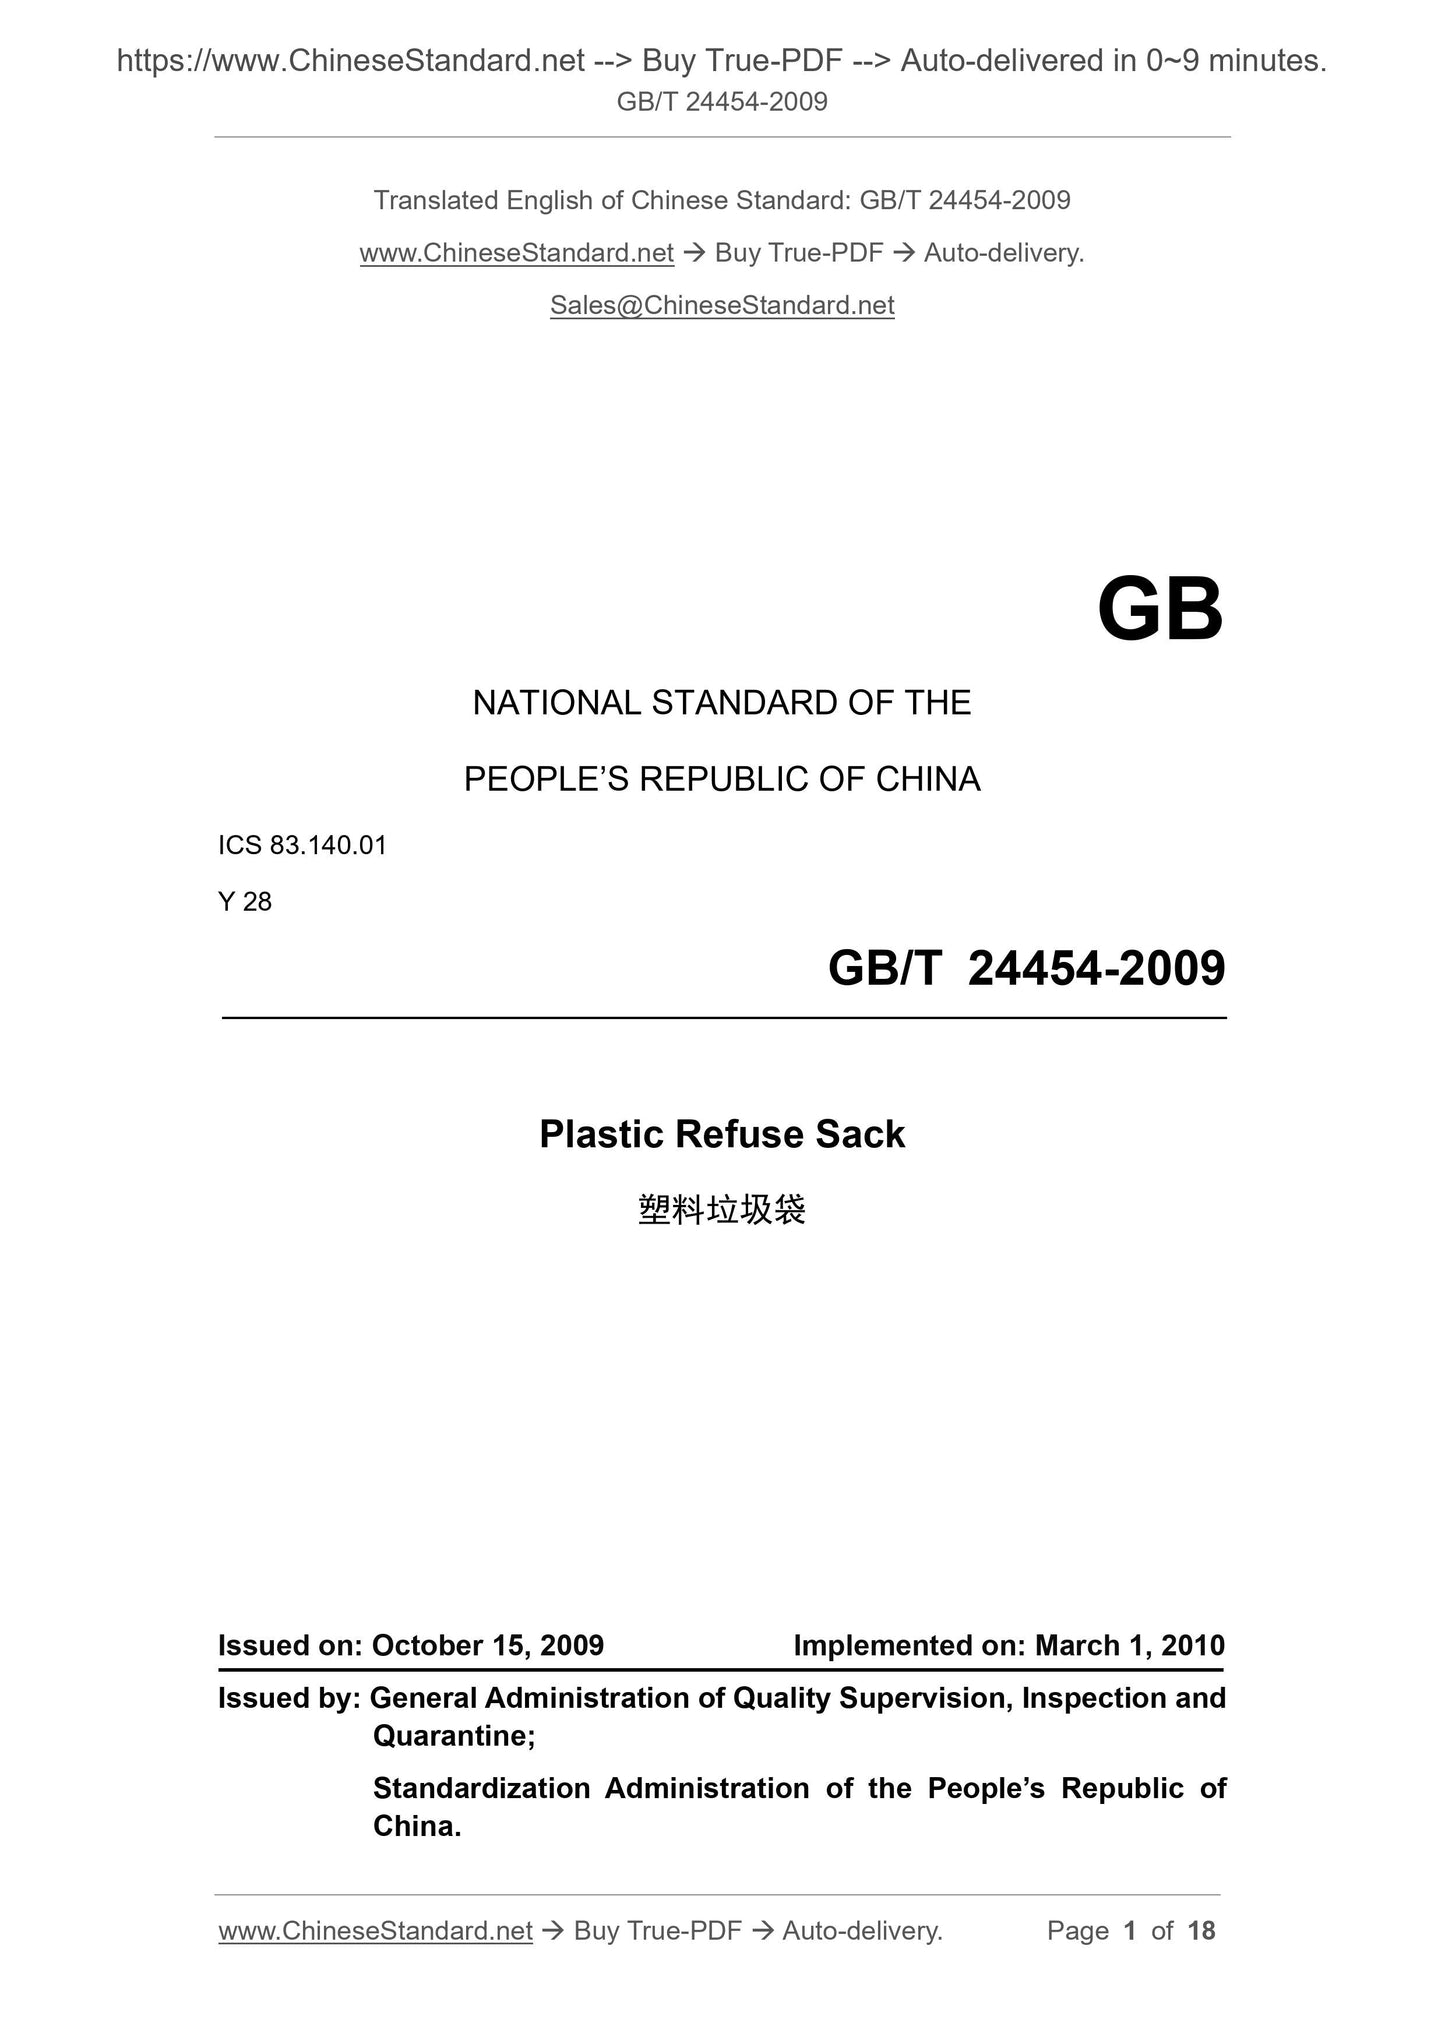 GB/T 24454-2009 Page 1